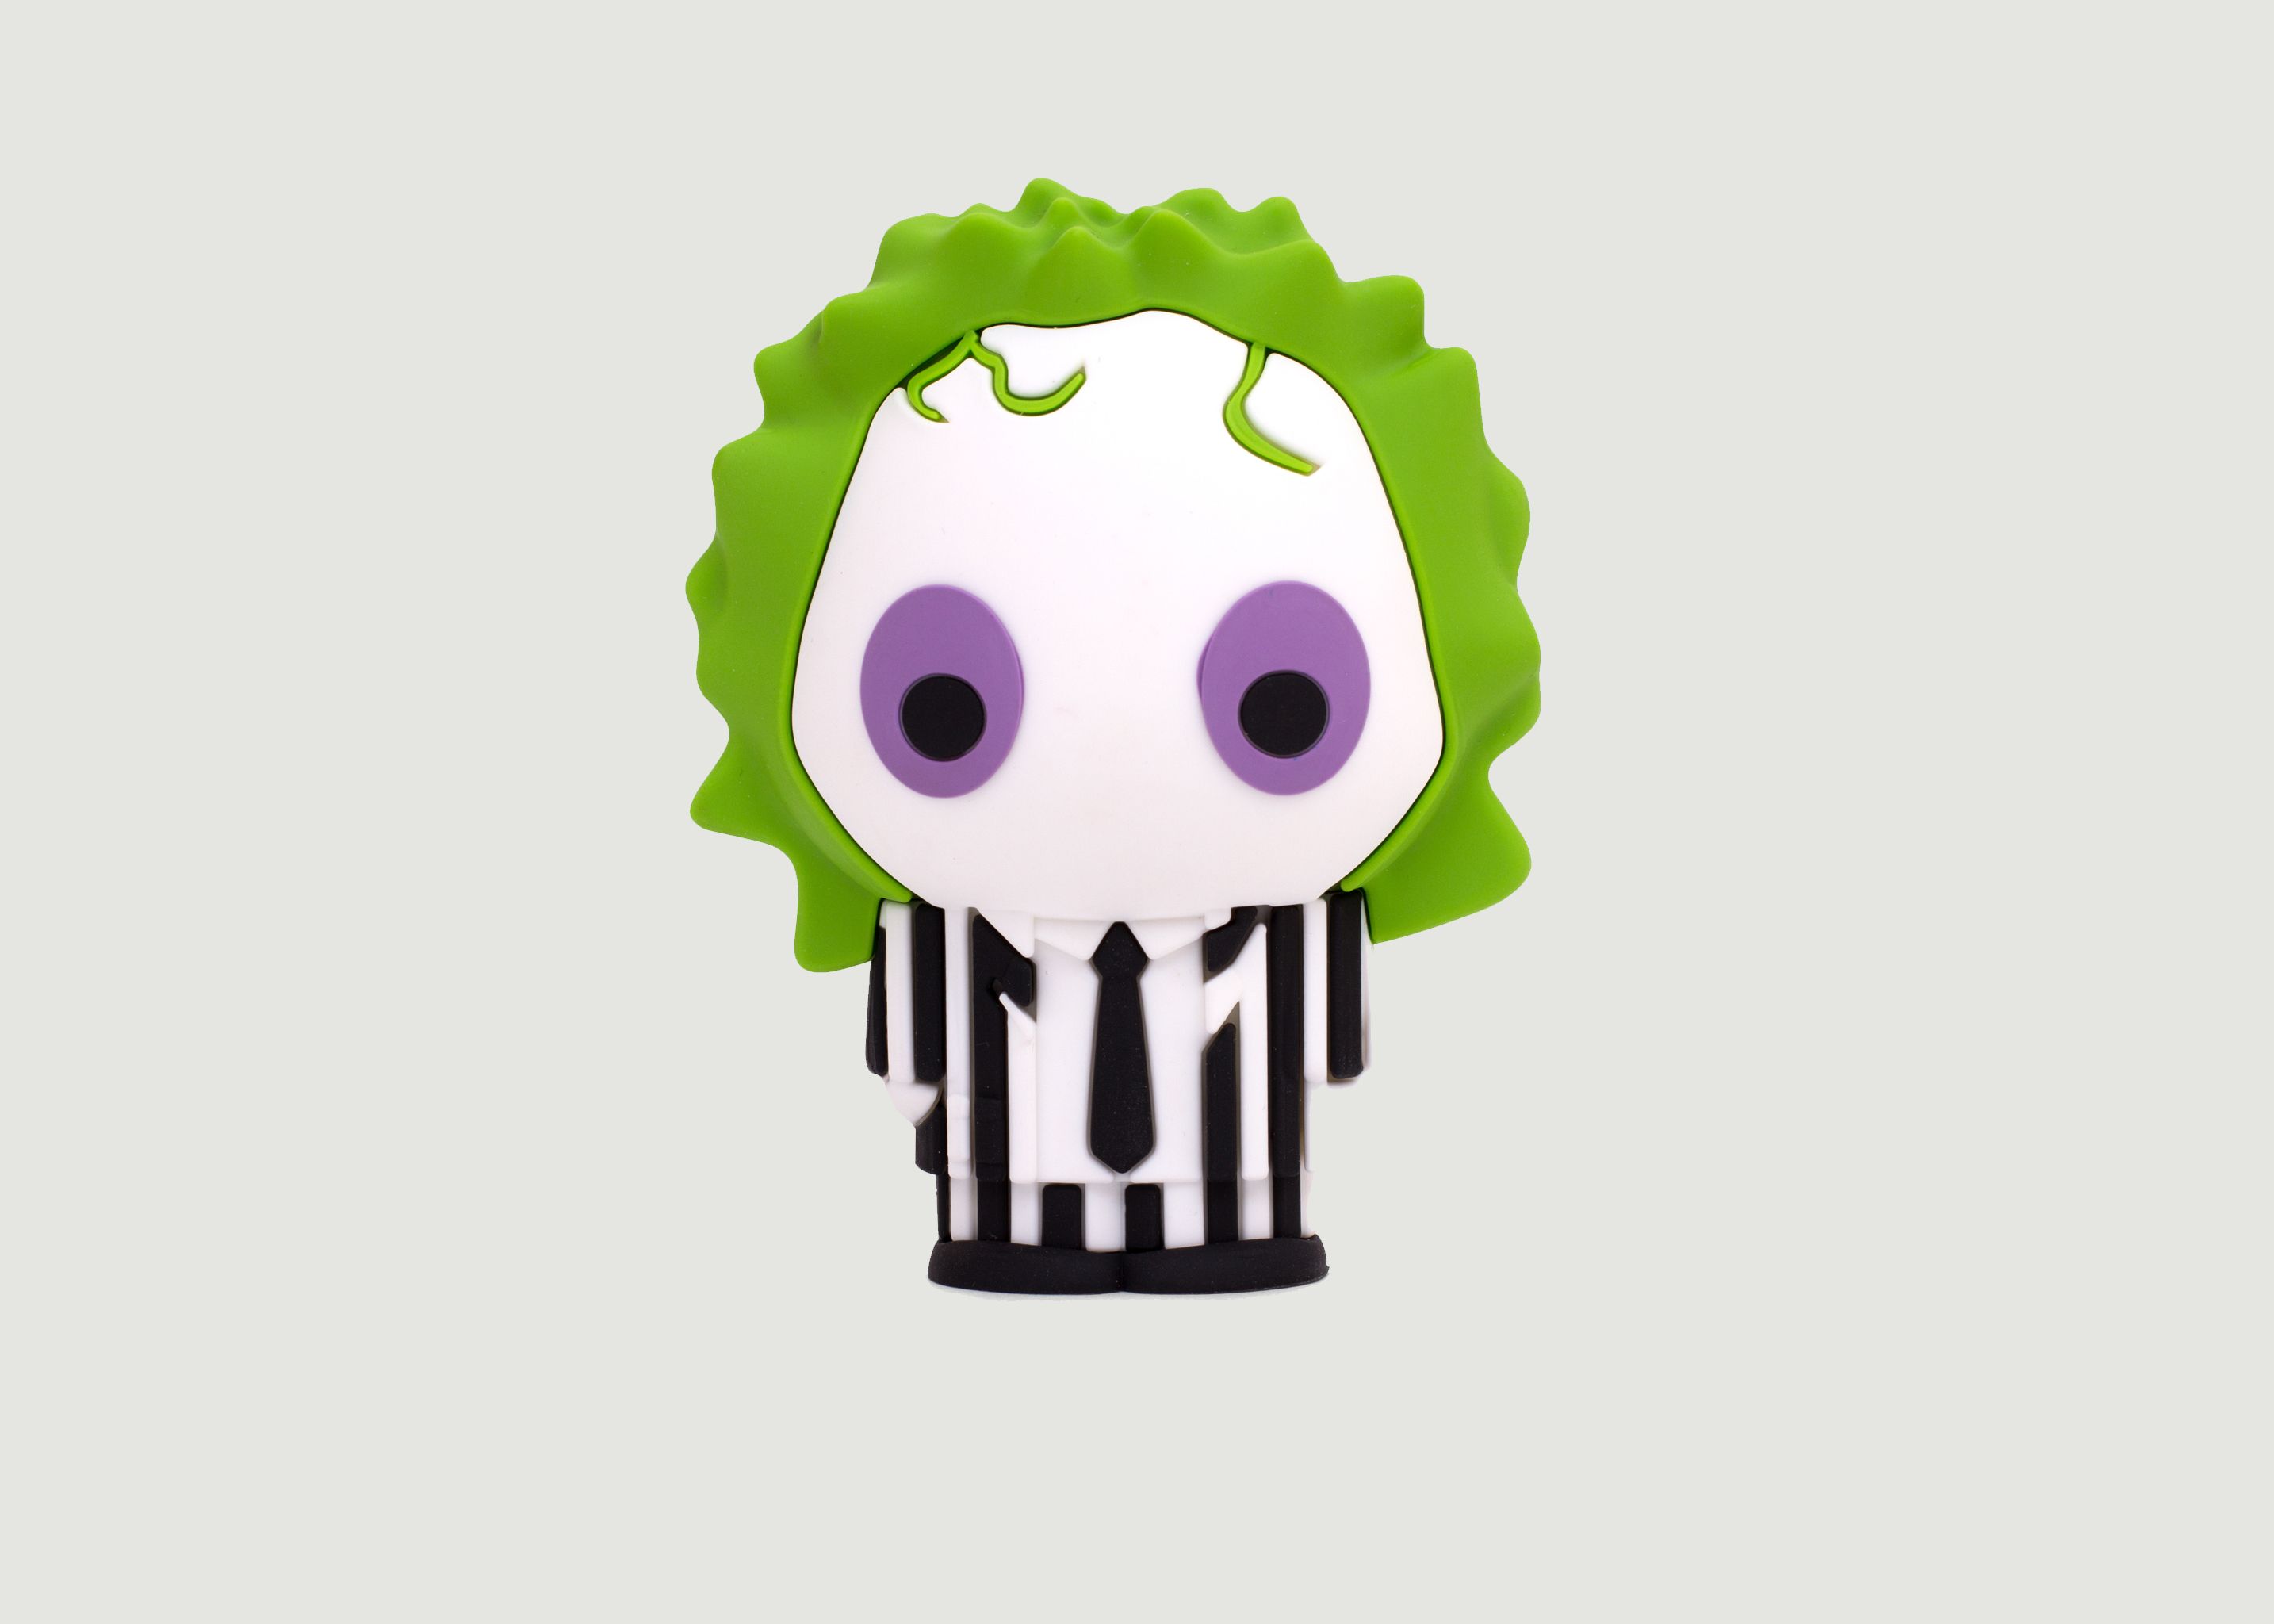 Batterie Portable BeetleJuice - Thumbs Up